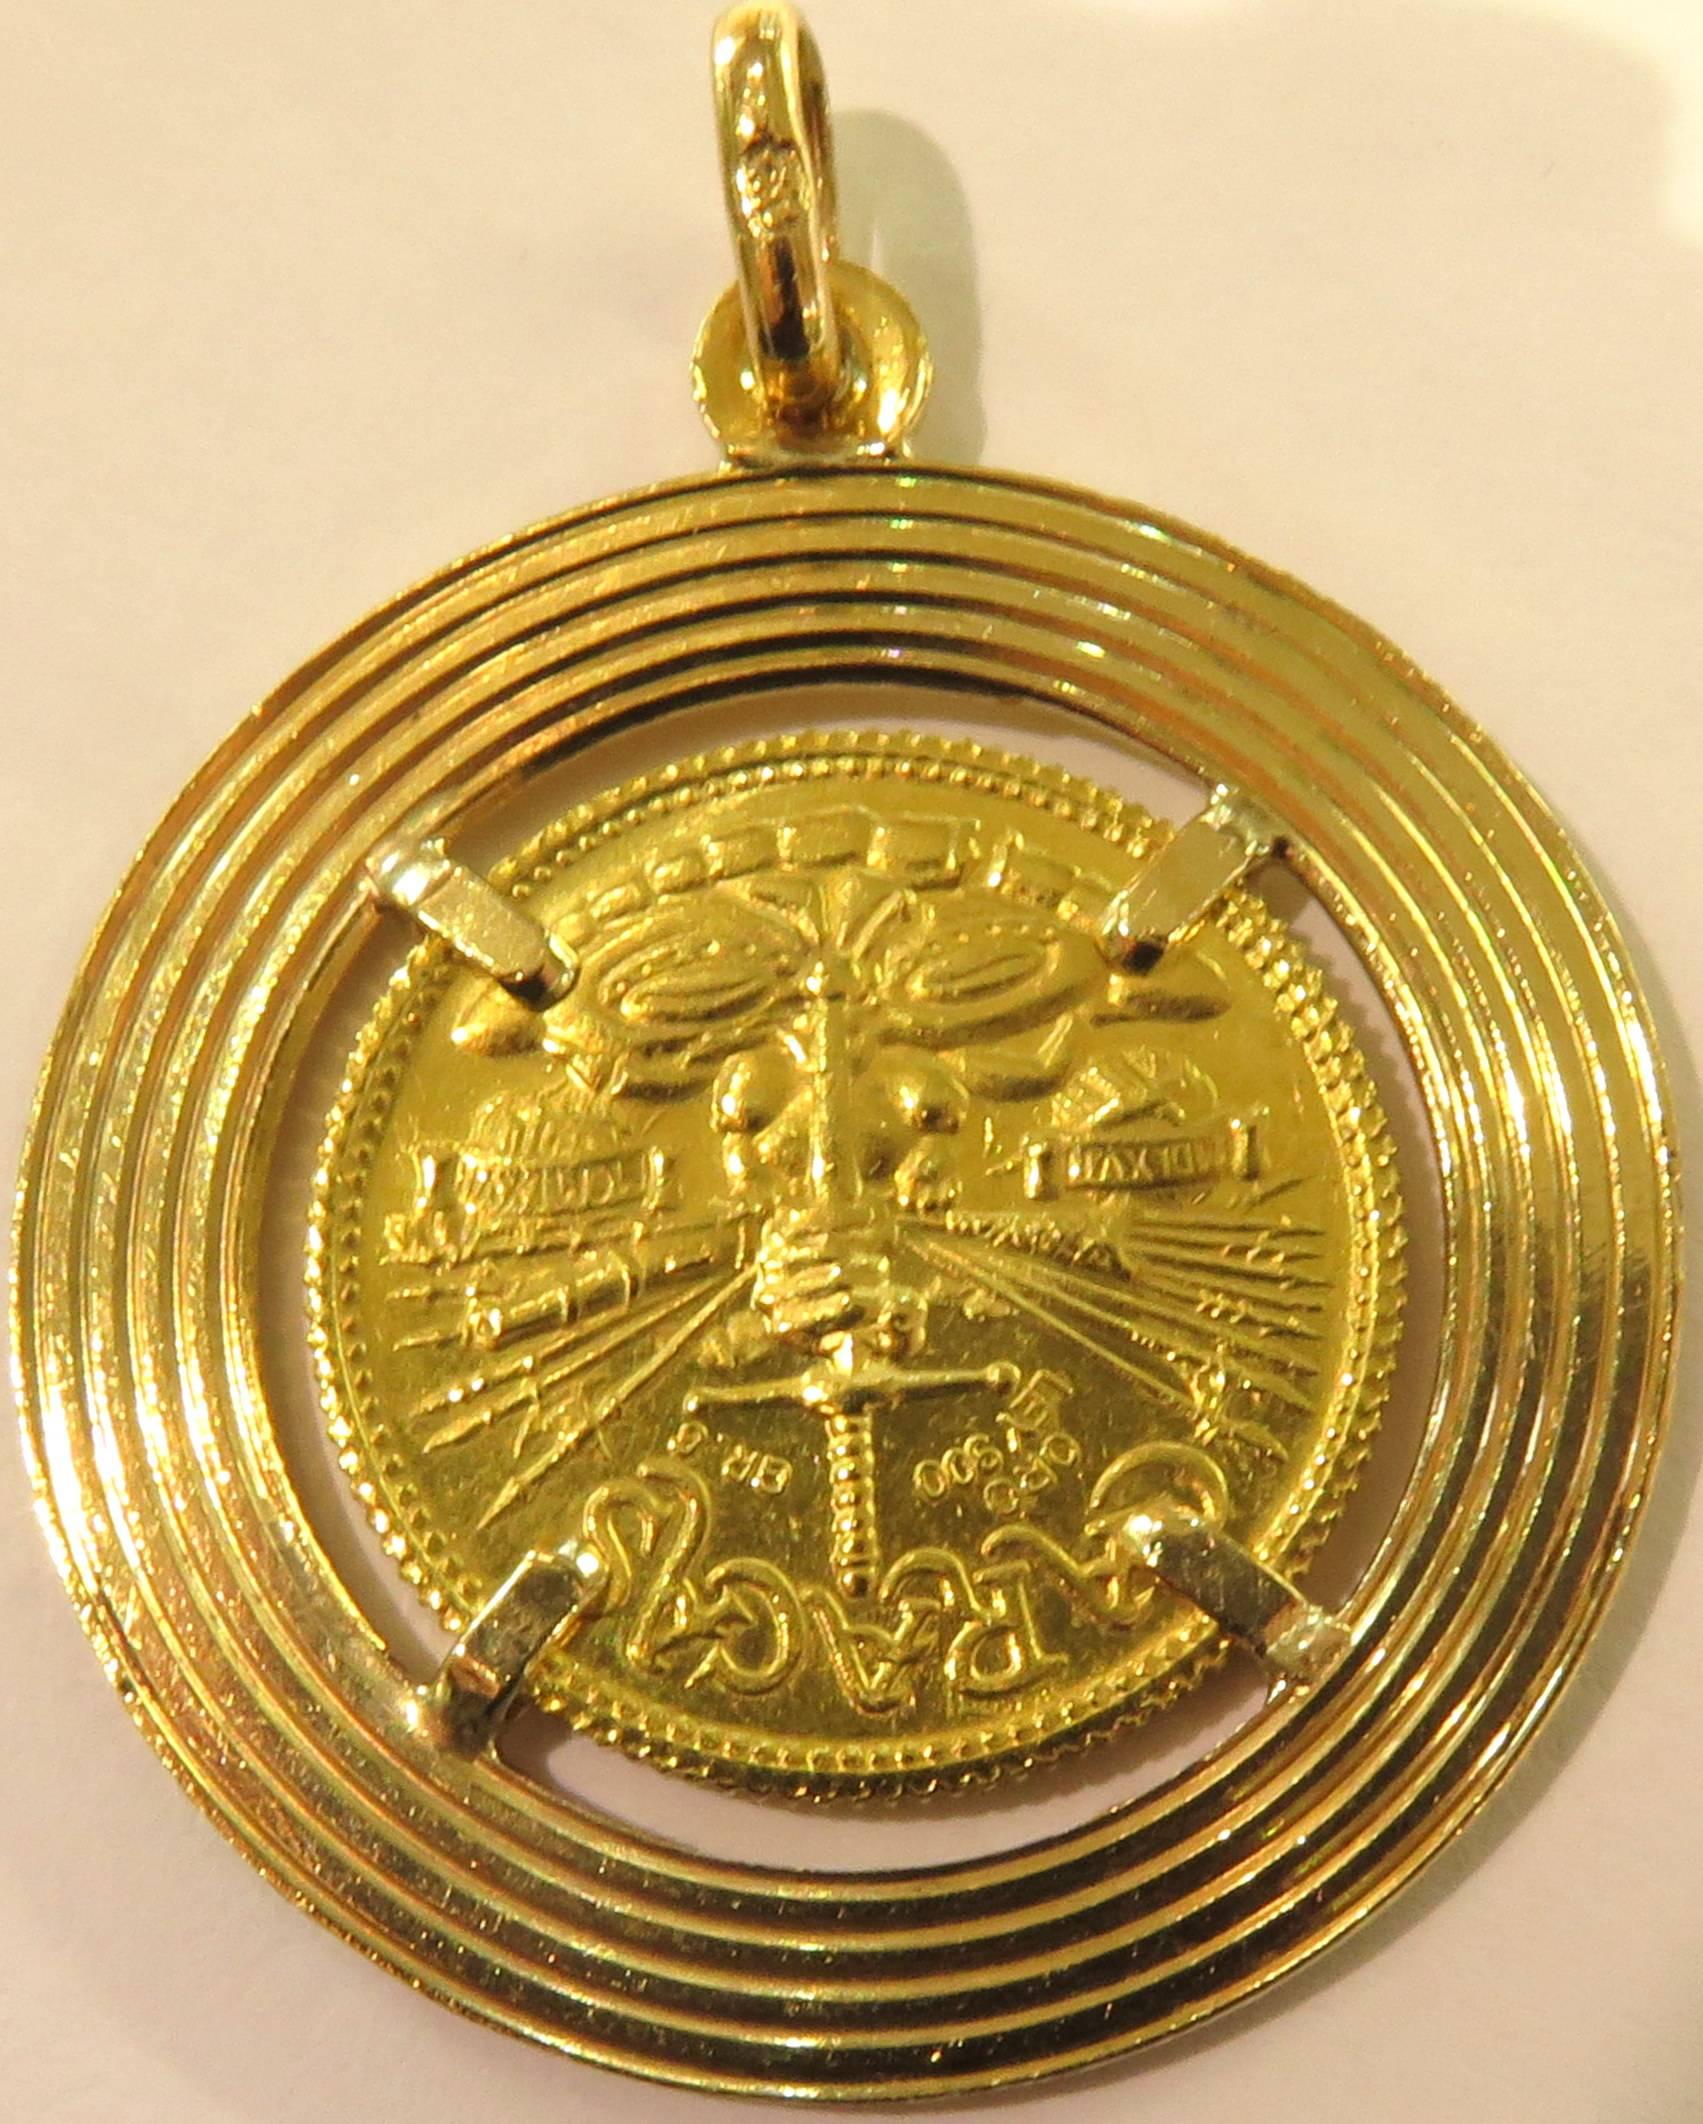 This 22k carat coin is mounted in a 18k ridged record looking disk. 
Including attached bale, this charm/pendant measures 1 9/16 inch high by 1 1/4 inch across.
This charm pendant weighs 11.3 grams